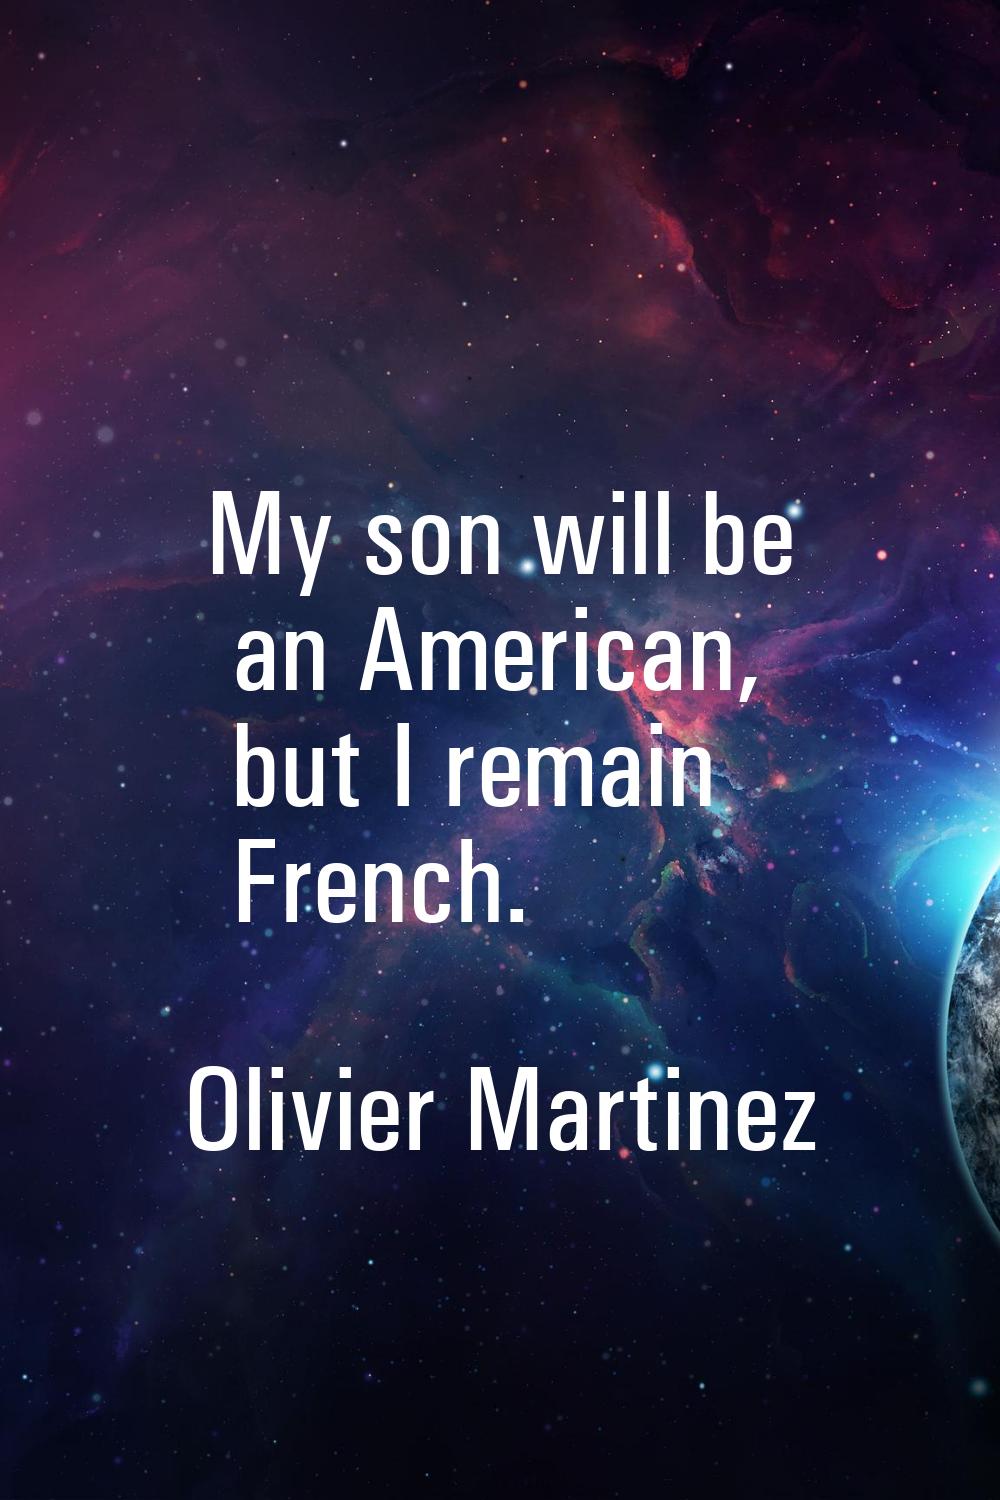 My son will be an American, but I remain French.